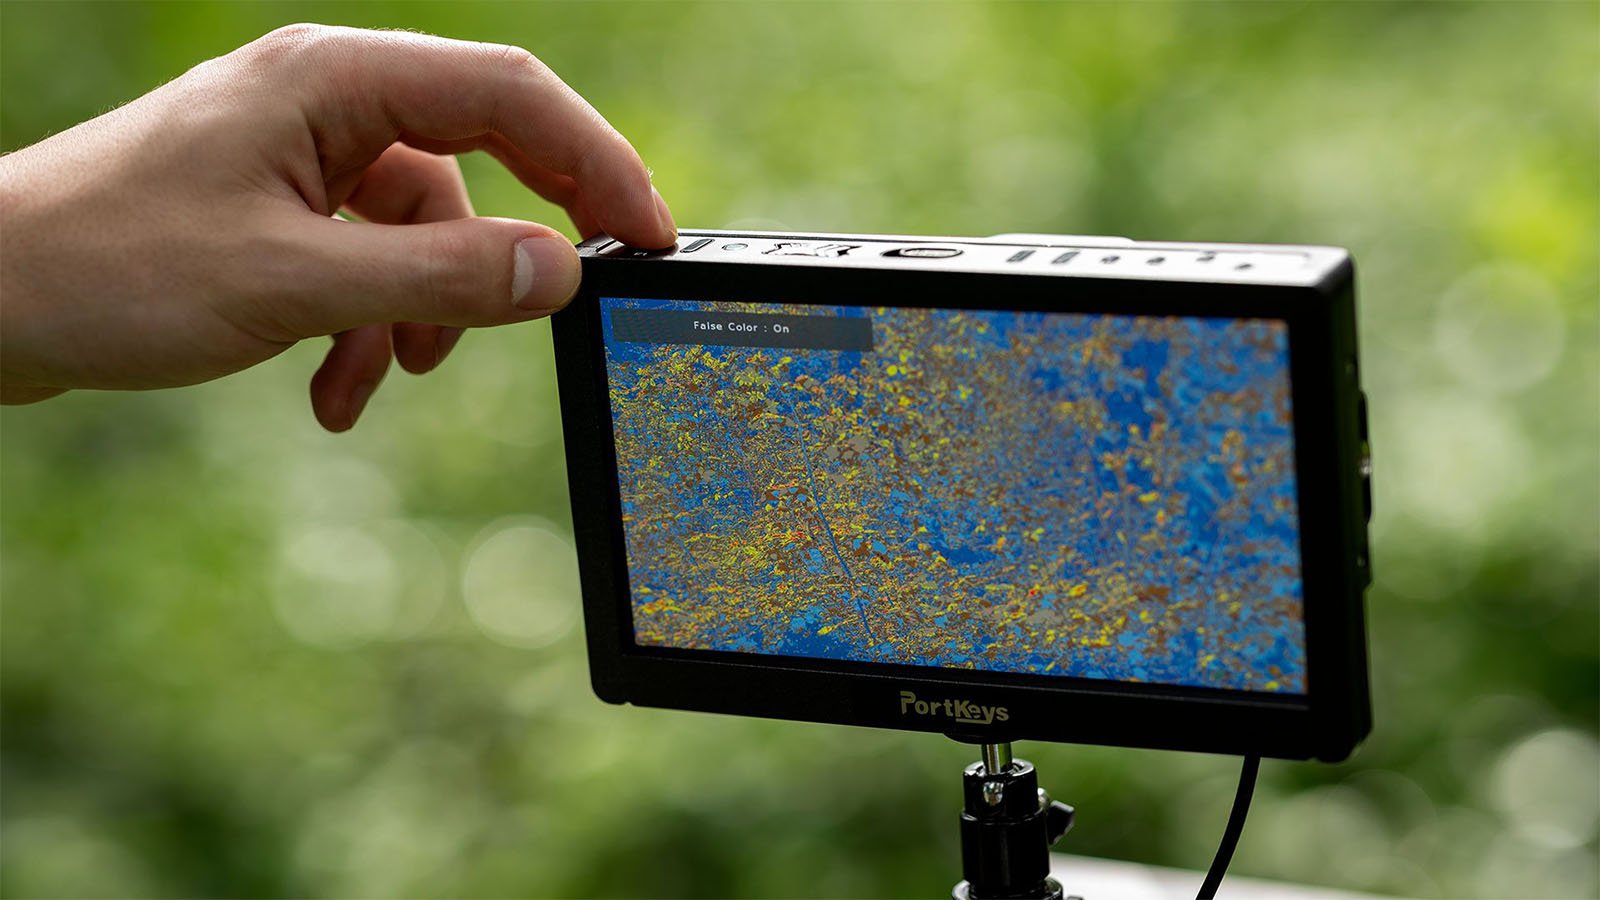 A person adjusts the settings on a PortKeys monitor mounted on a stand. The screen displays an image of a tree with green and yellow leaves against a blue sky. The background is blurred greenery.